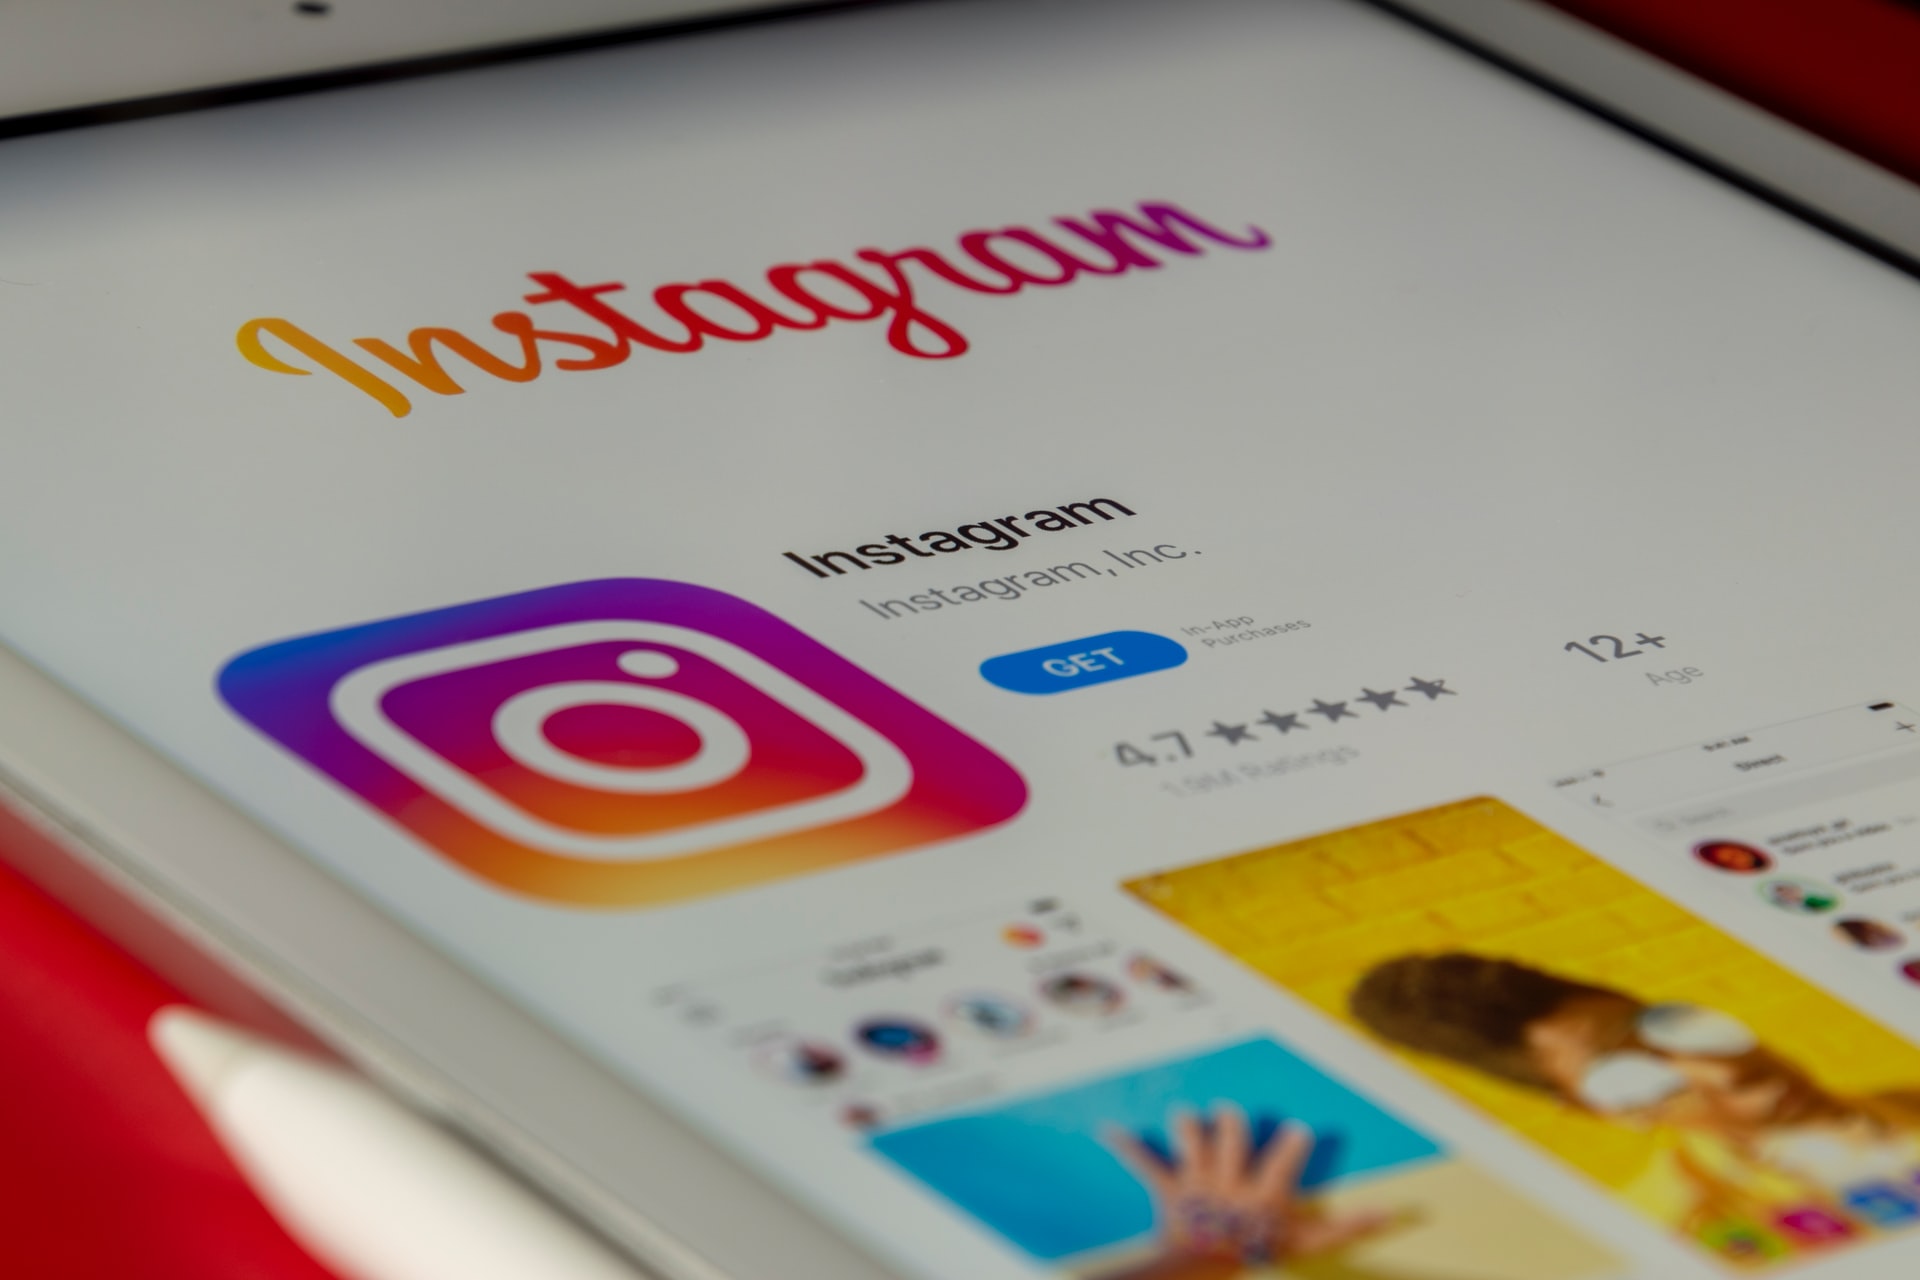 Instagram introduces new parental controls functions – after research shows its detrimental effects on teens